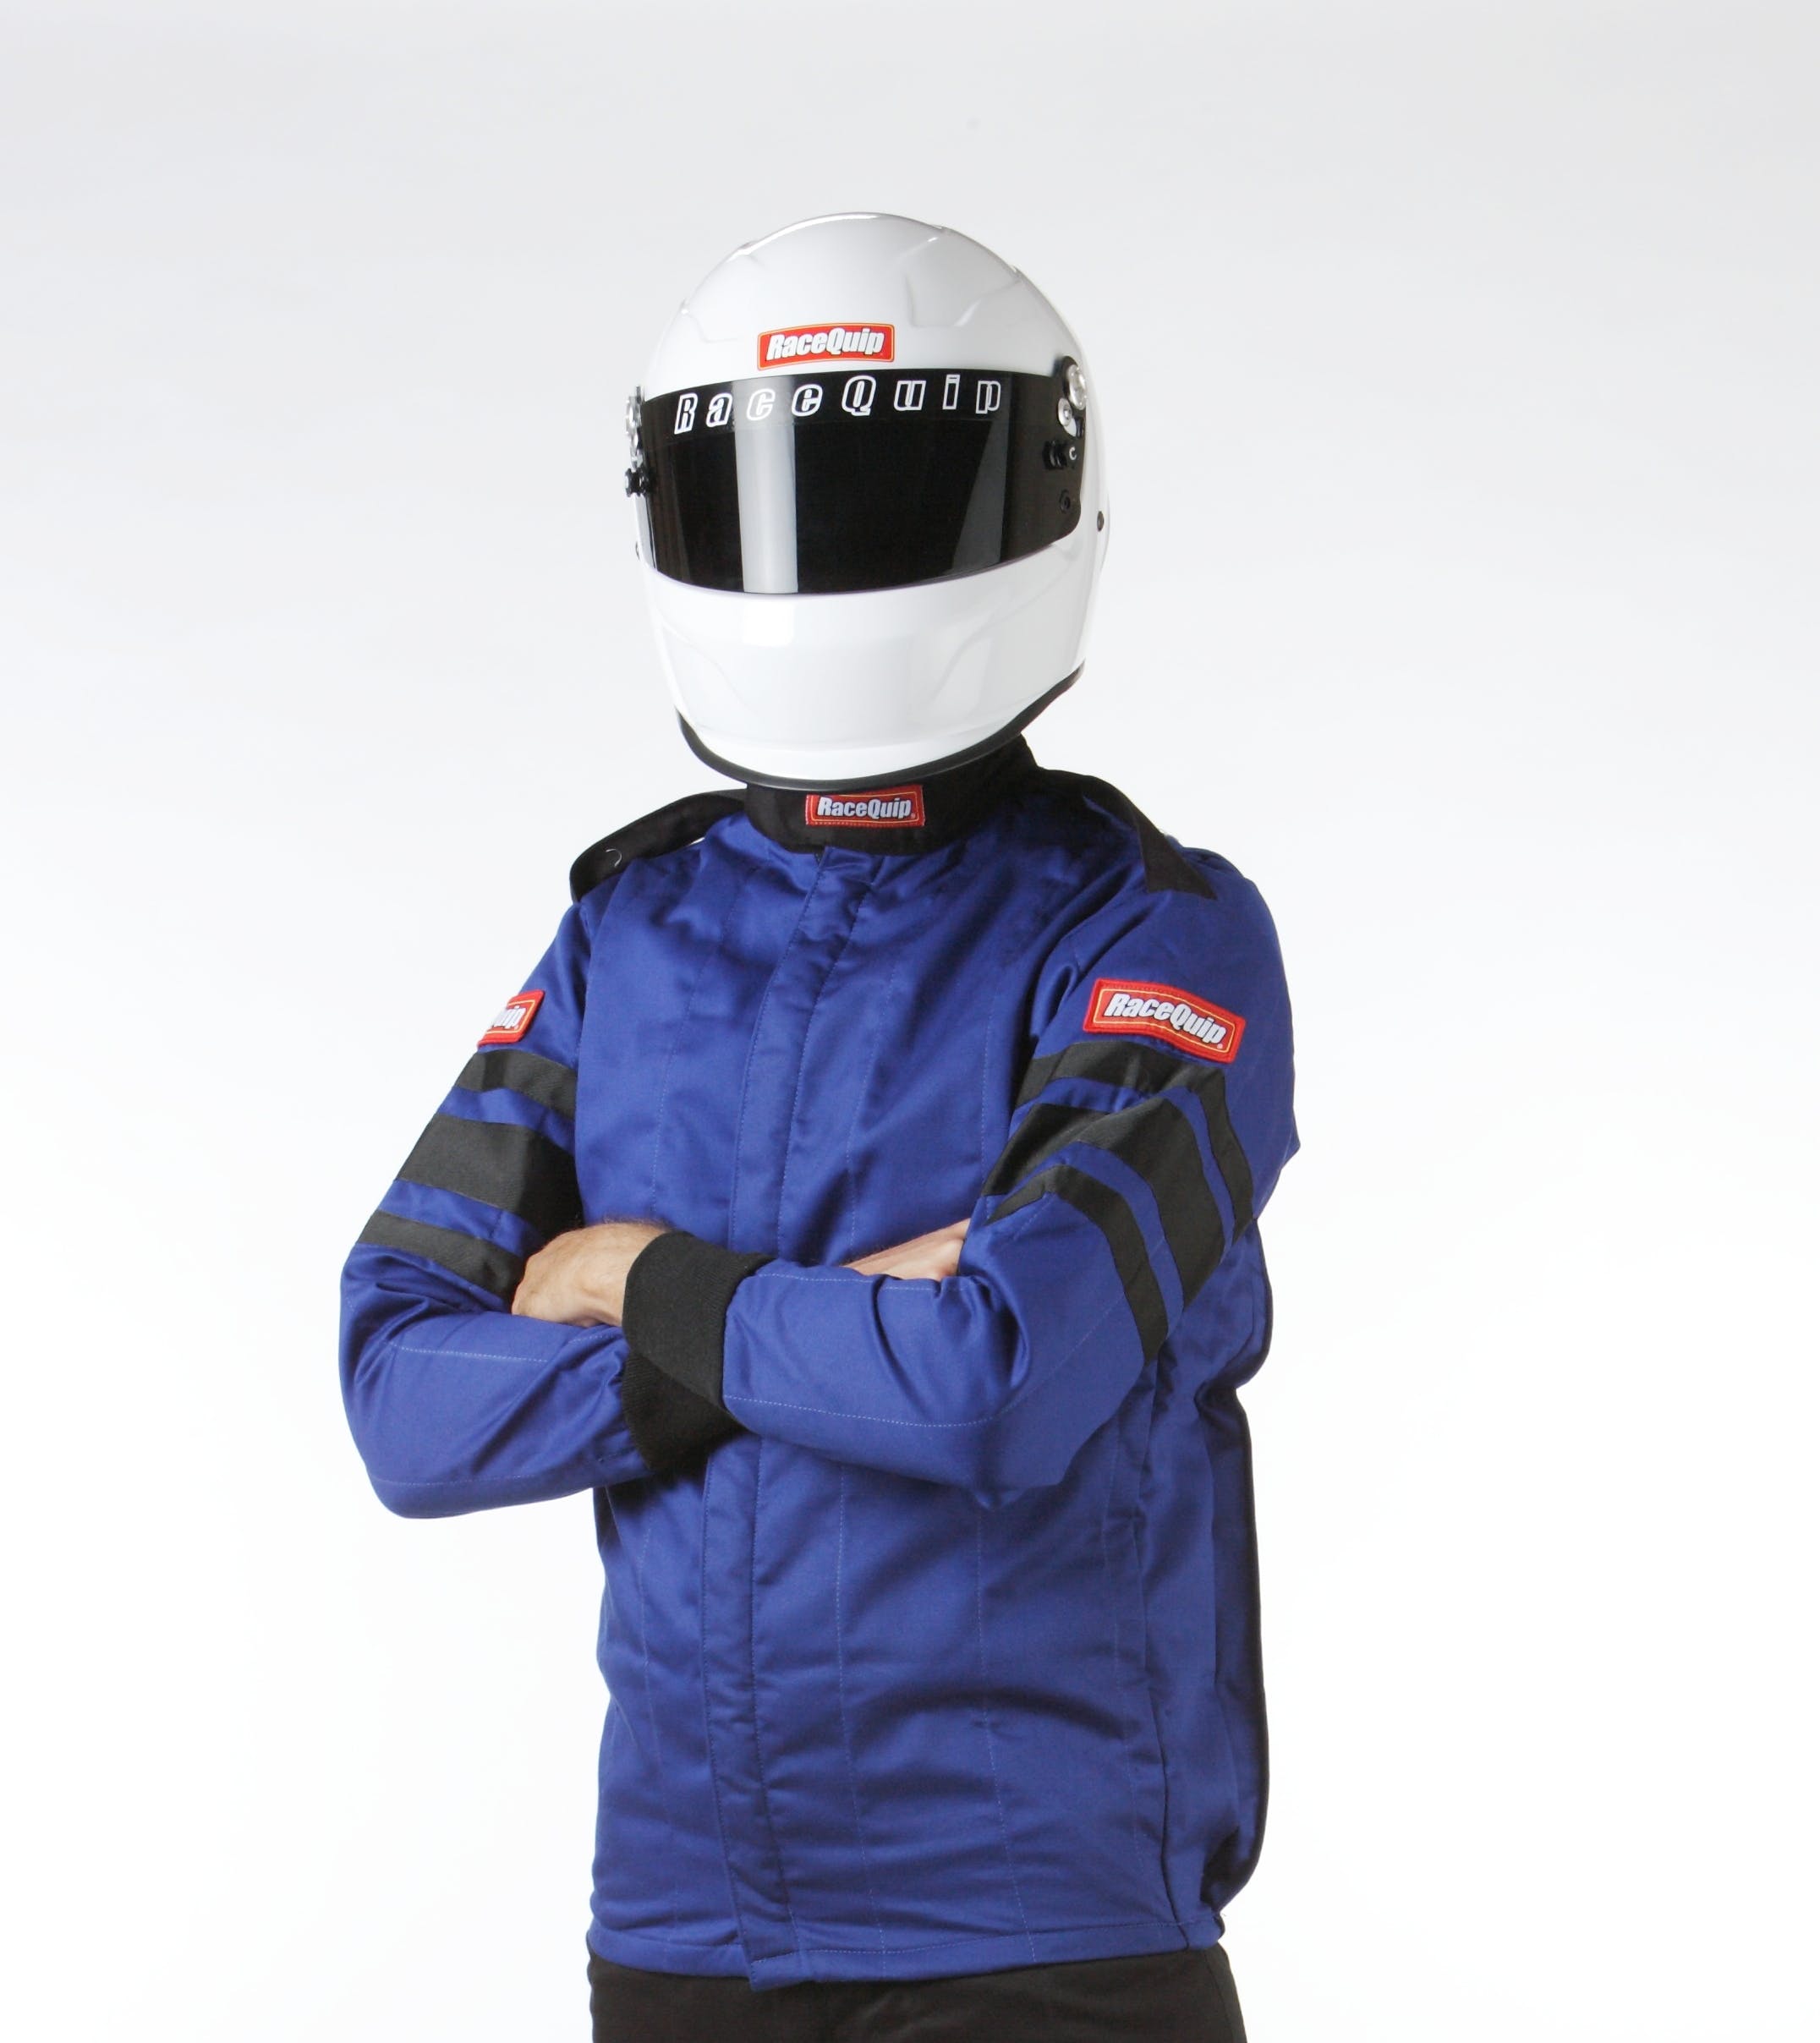 RaceQuip 121022 SFI-5 Pyrovatex Multi-Layer Racing Fire Jacket (Blue, Small)